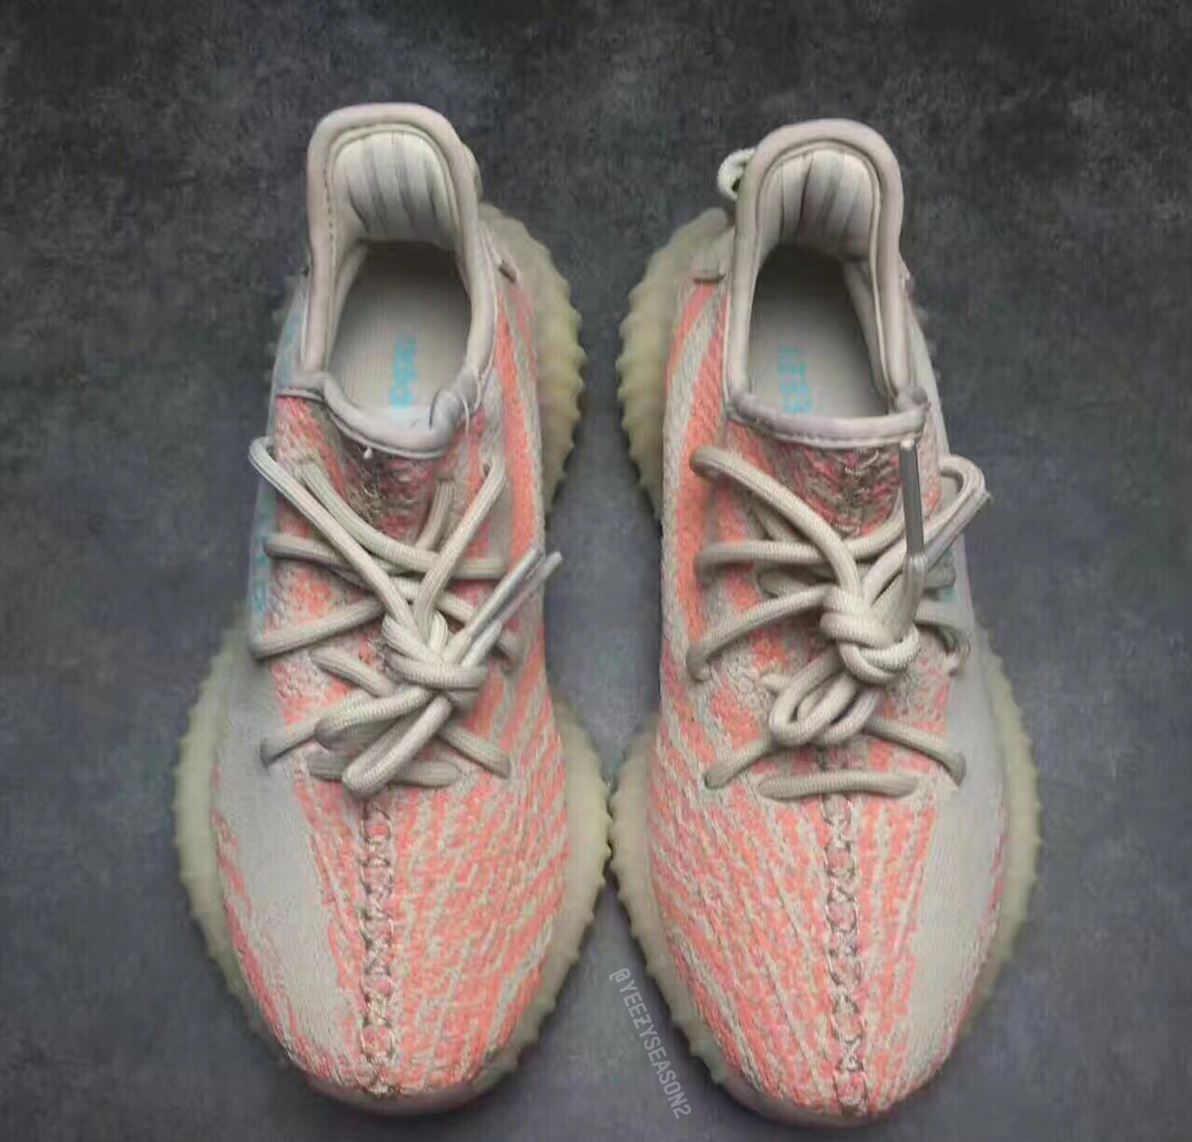 yeezy coral